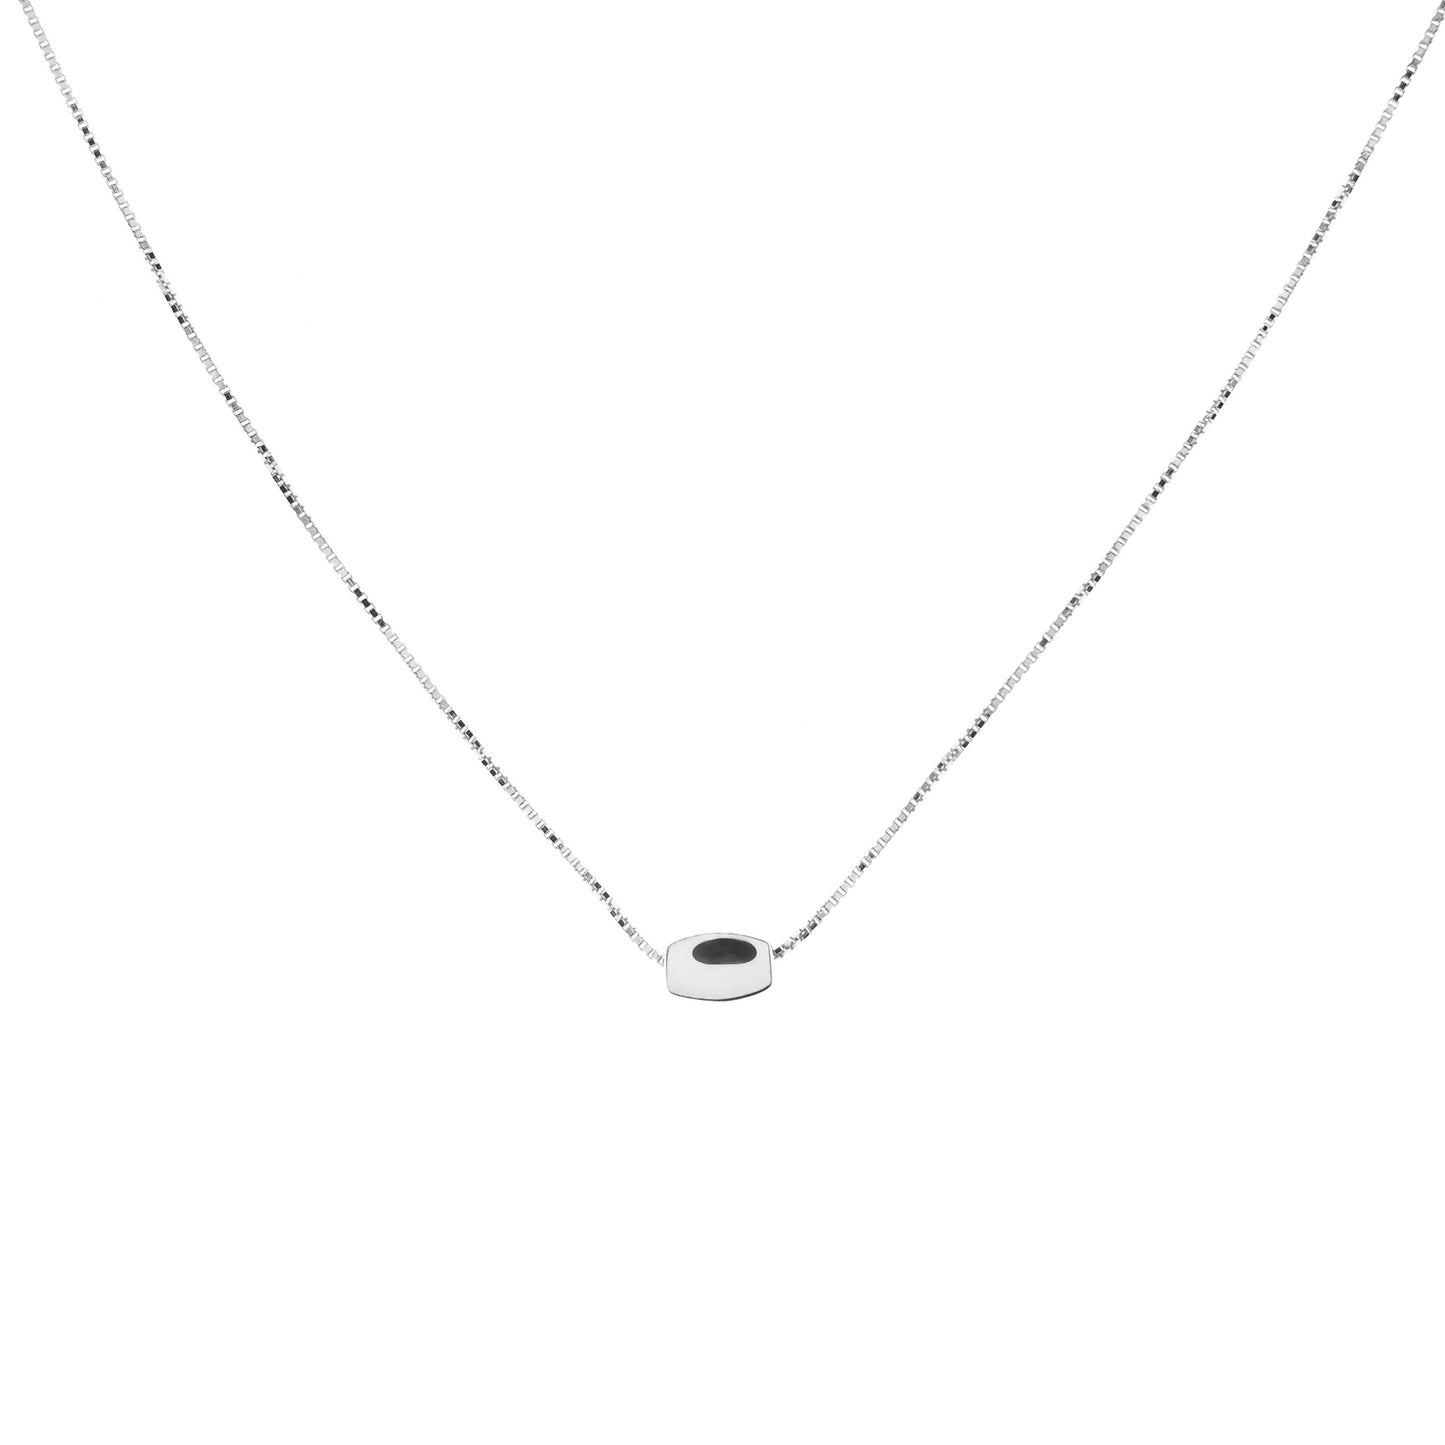 Sterling silver necklace "Tony silver"